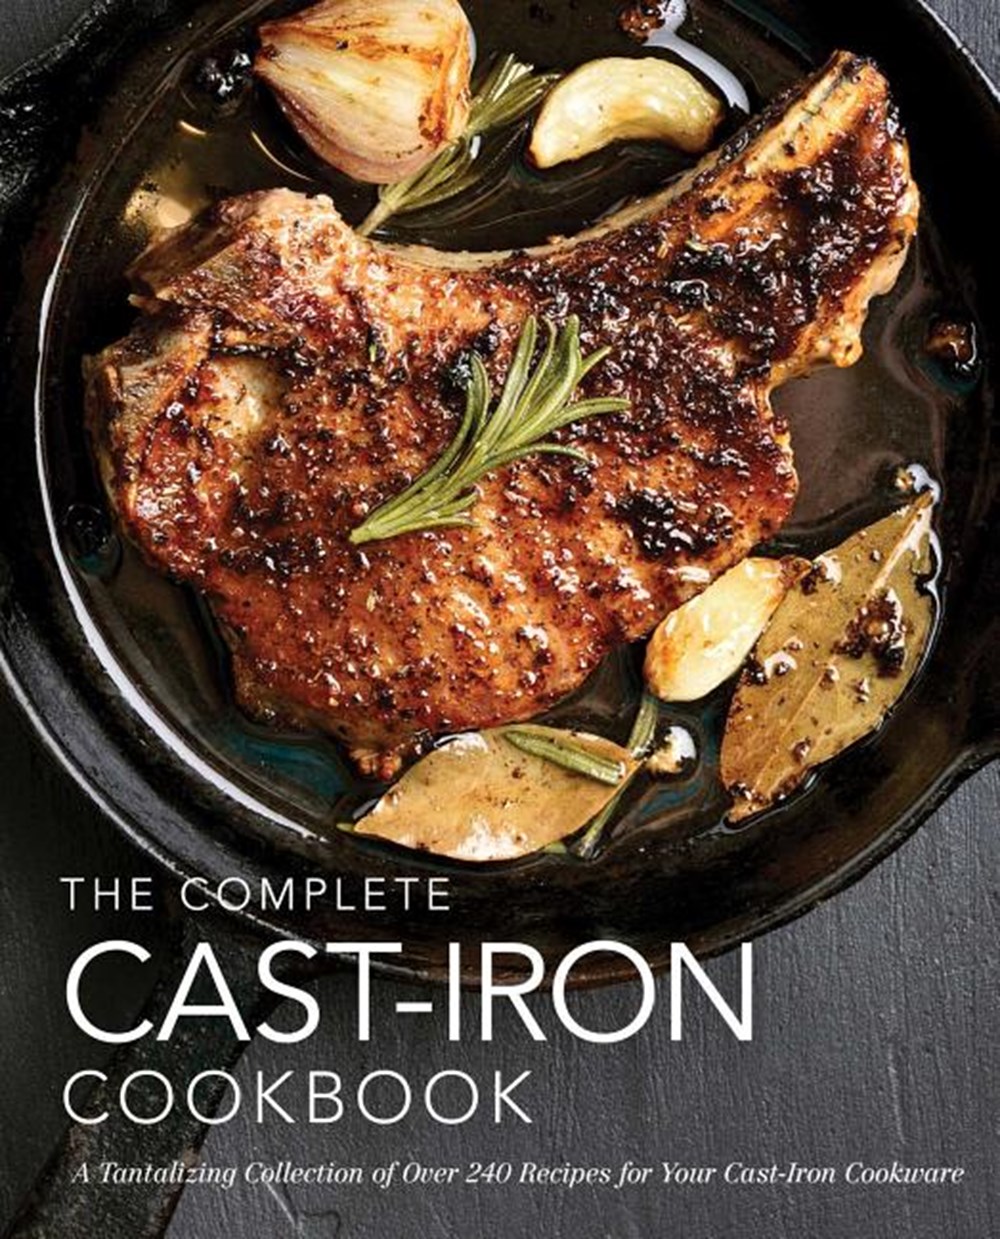 Complete Cast Iron Cookbook: A Tantalizing Collection of Over 240 Recipes for Your Cast-Iron Cookwar